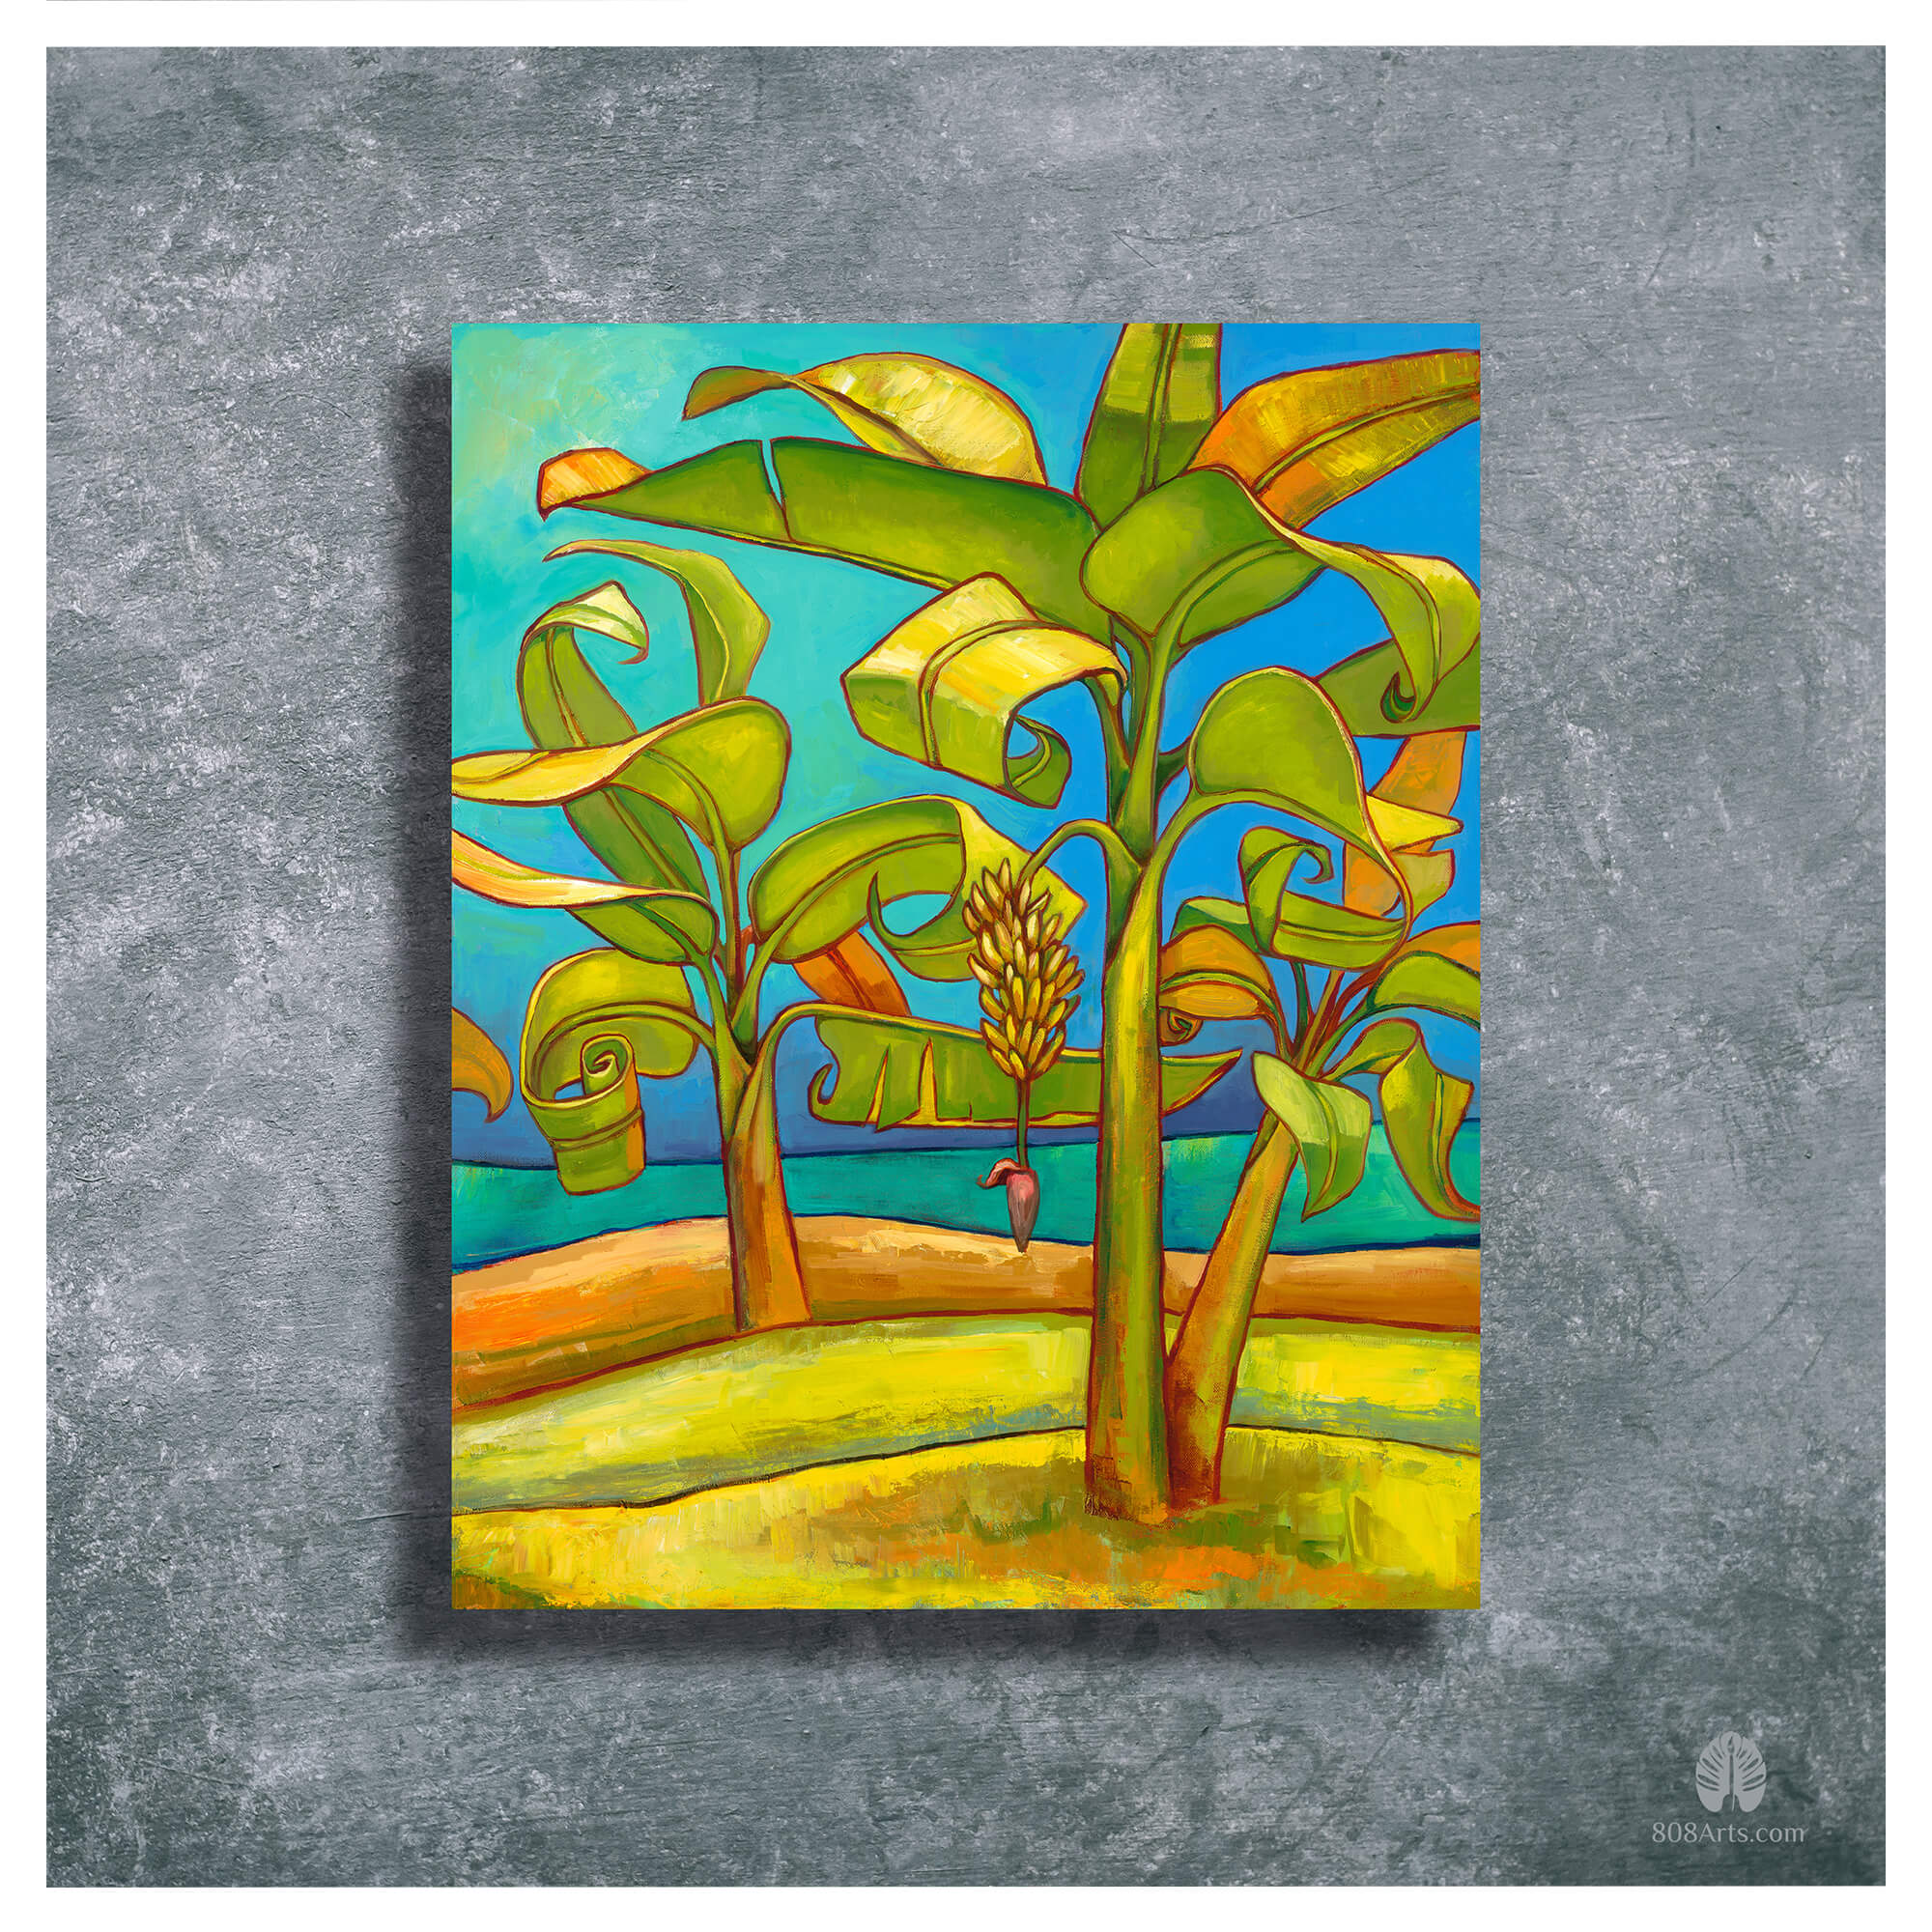 Banana trees with fruit on the shore by Hawaii artist Colin Redican